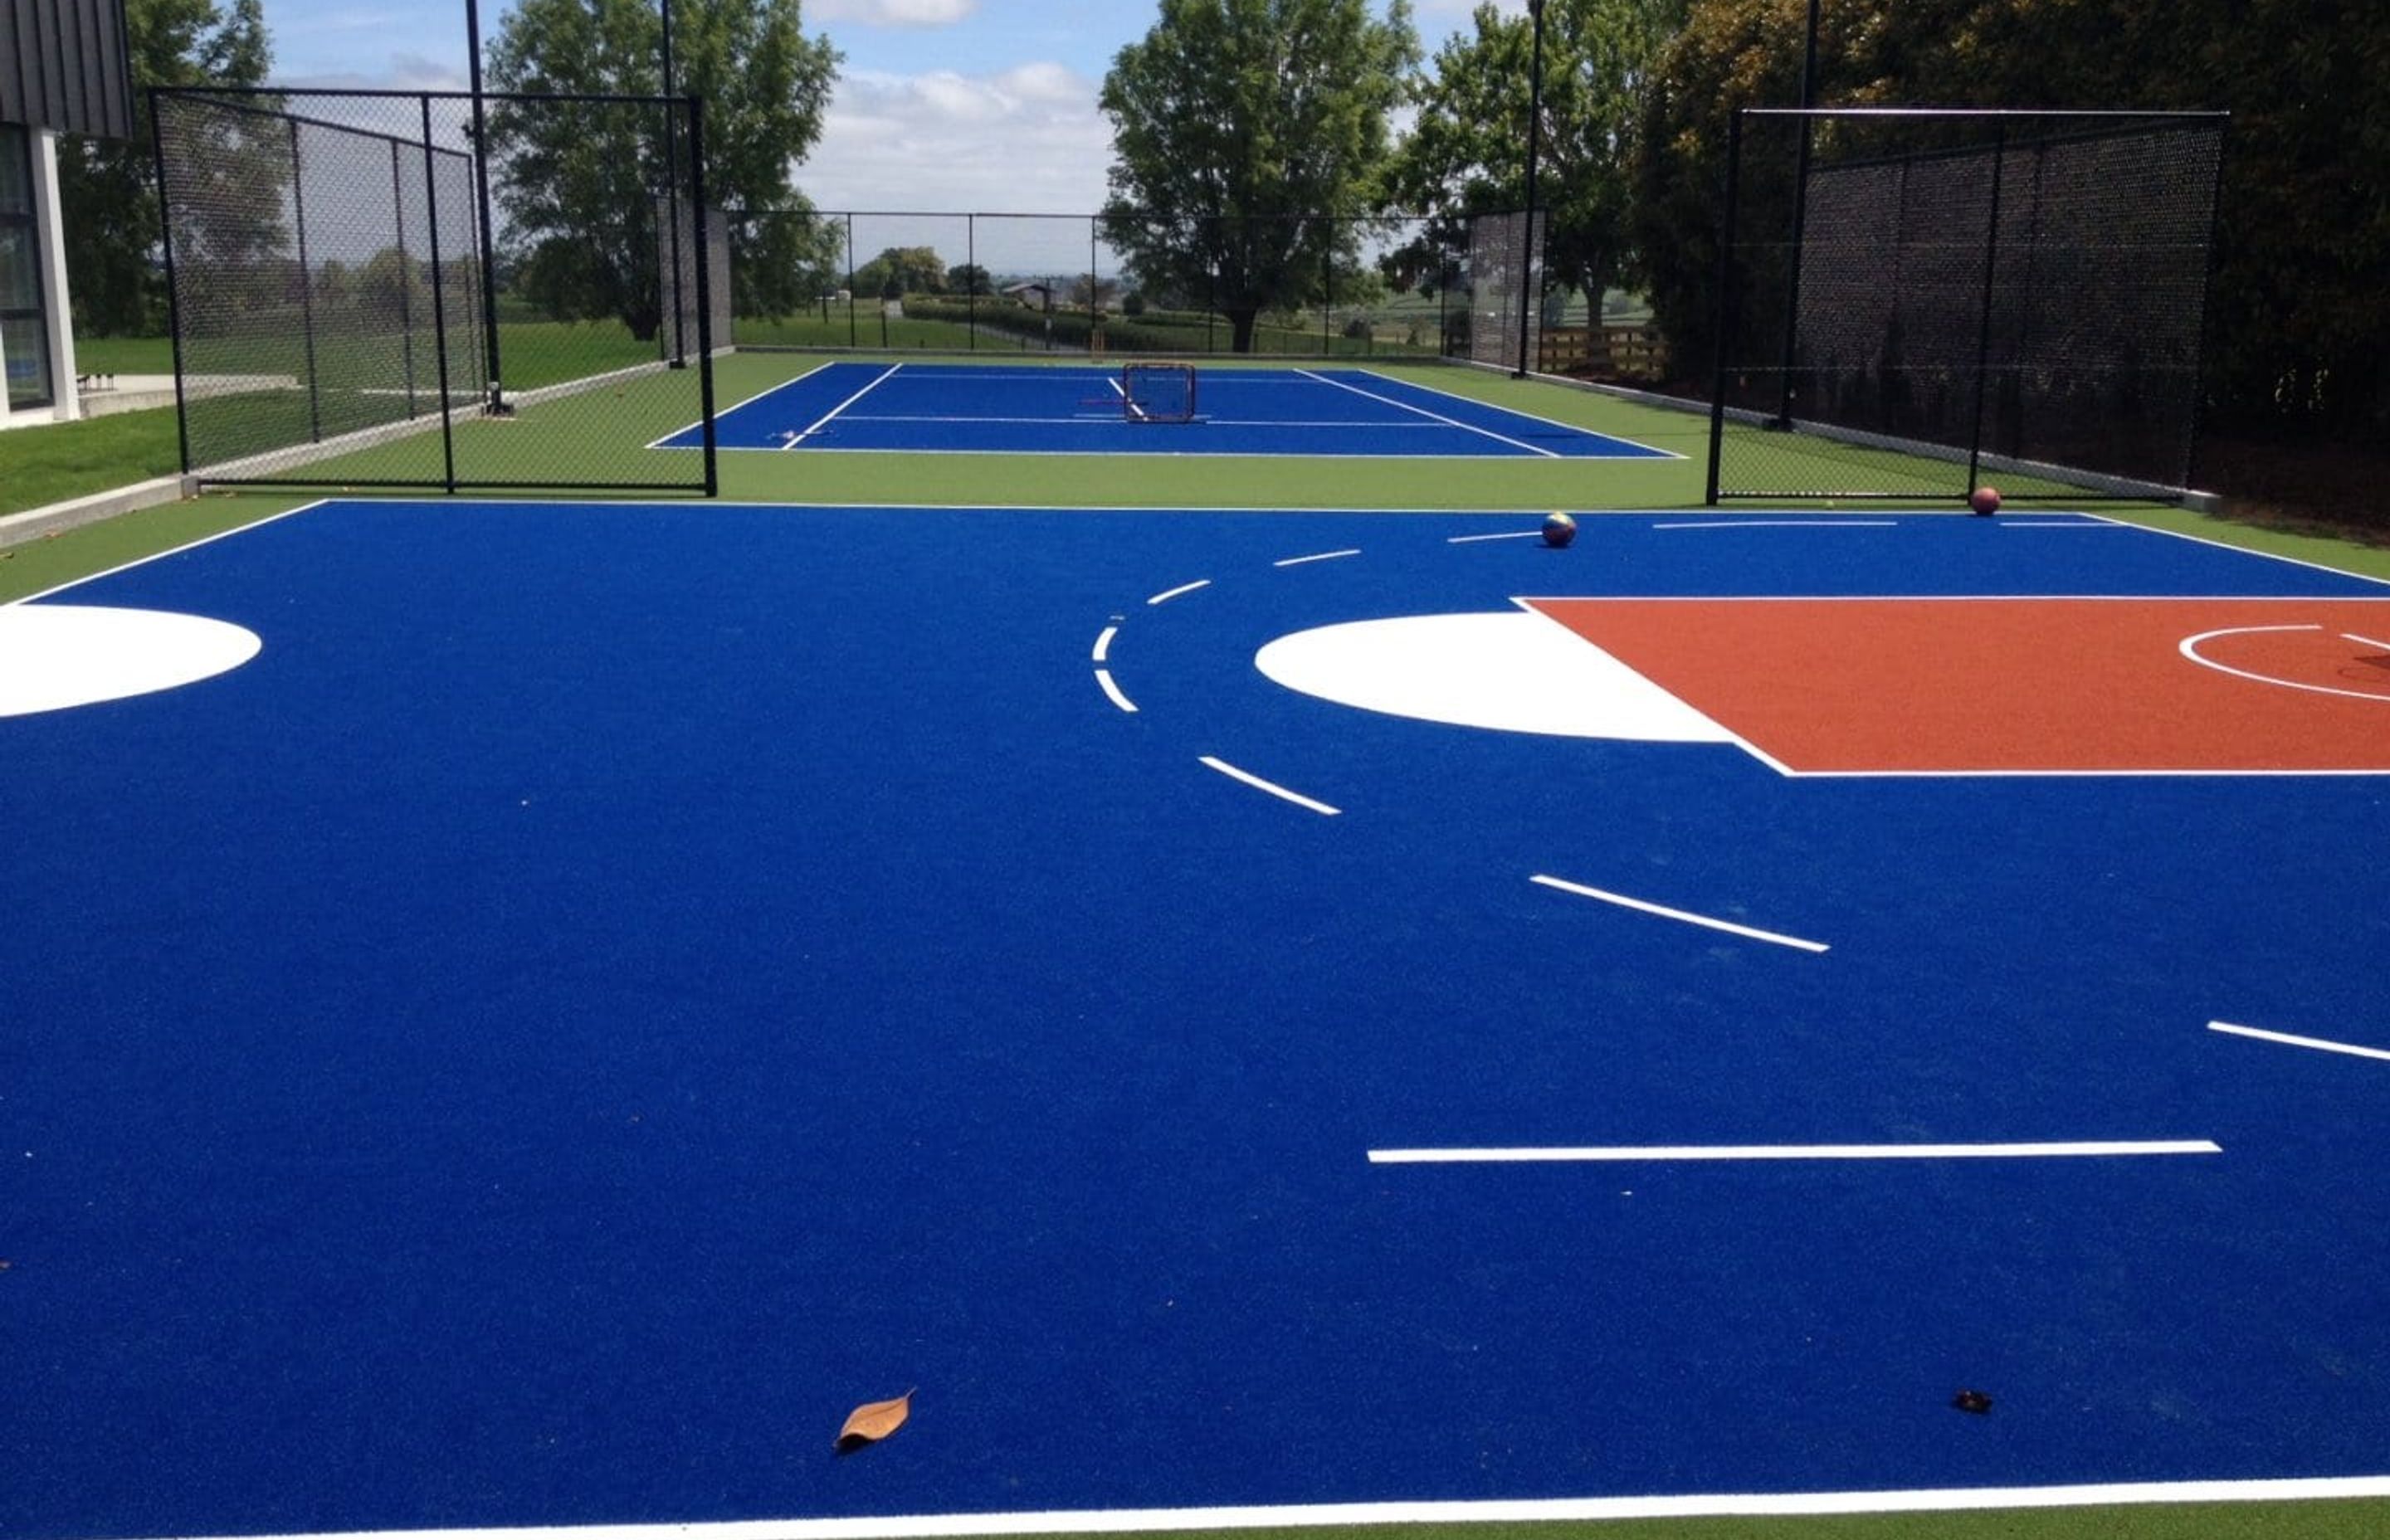 Multiplay court is perfect for Sports Mad Families